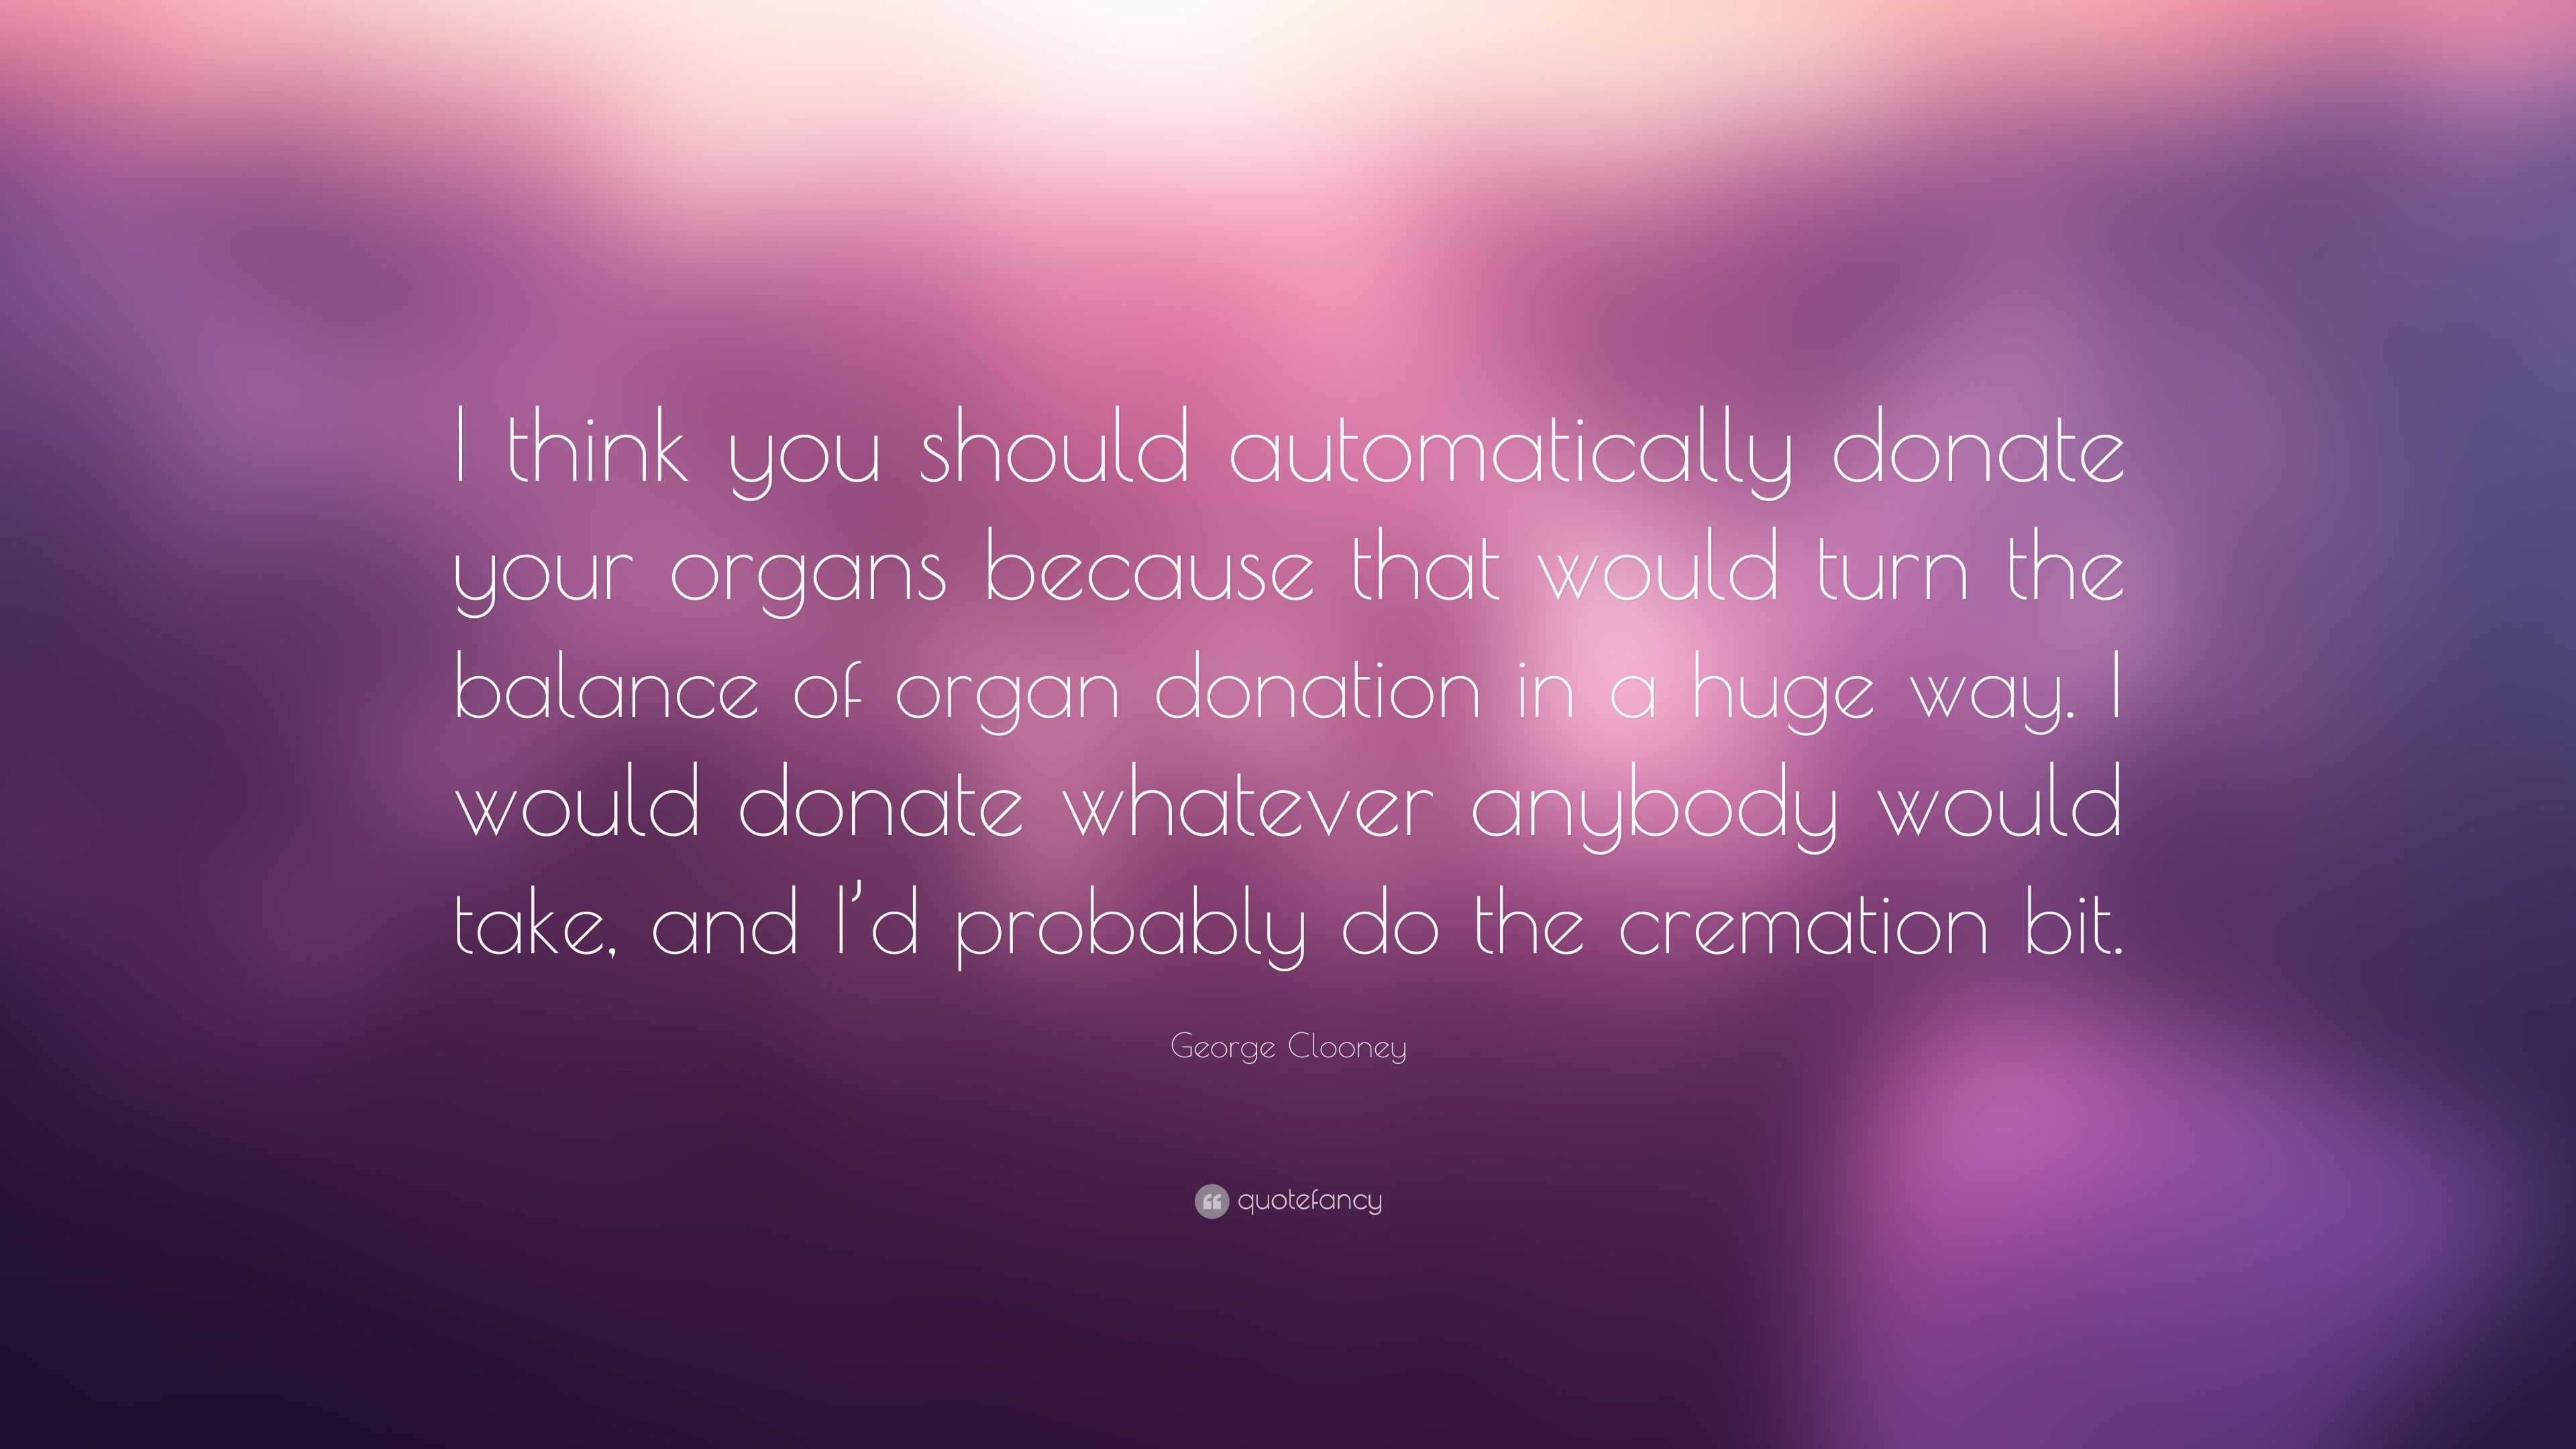 George Clooney Quote: “I think you should automatically donate your organs  because that would turn the balance of organ donation in a huge way....”